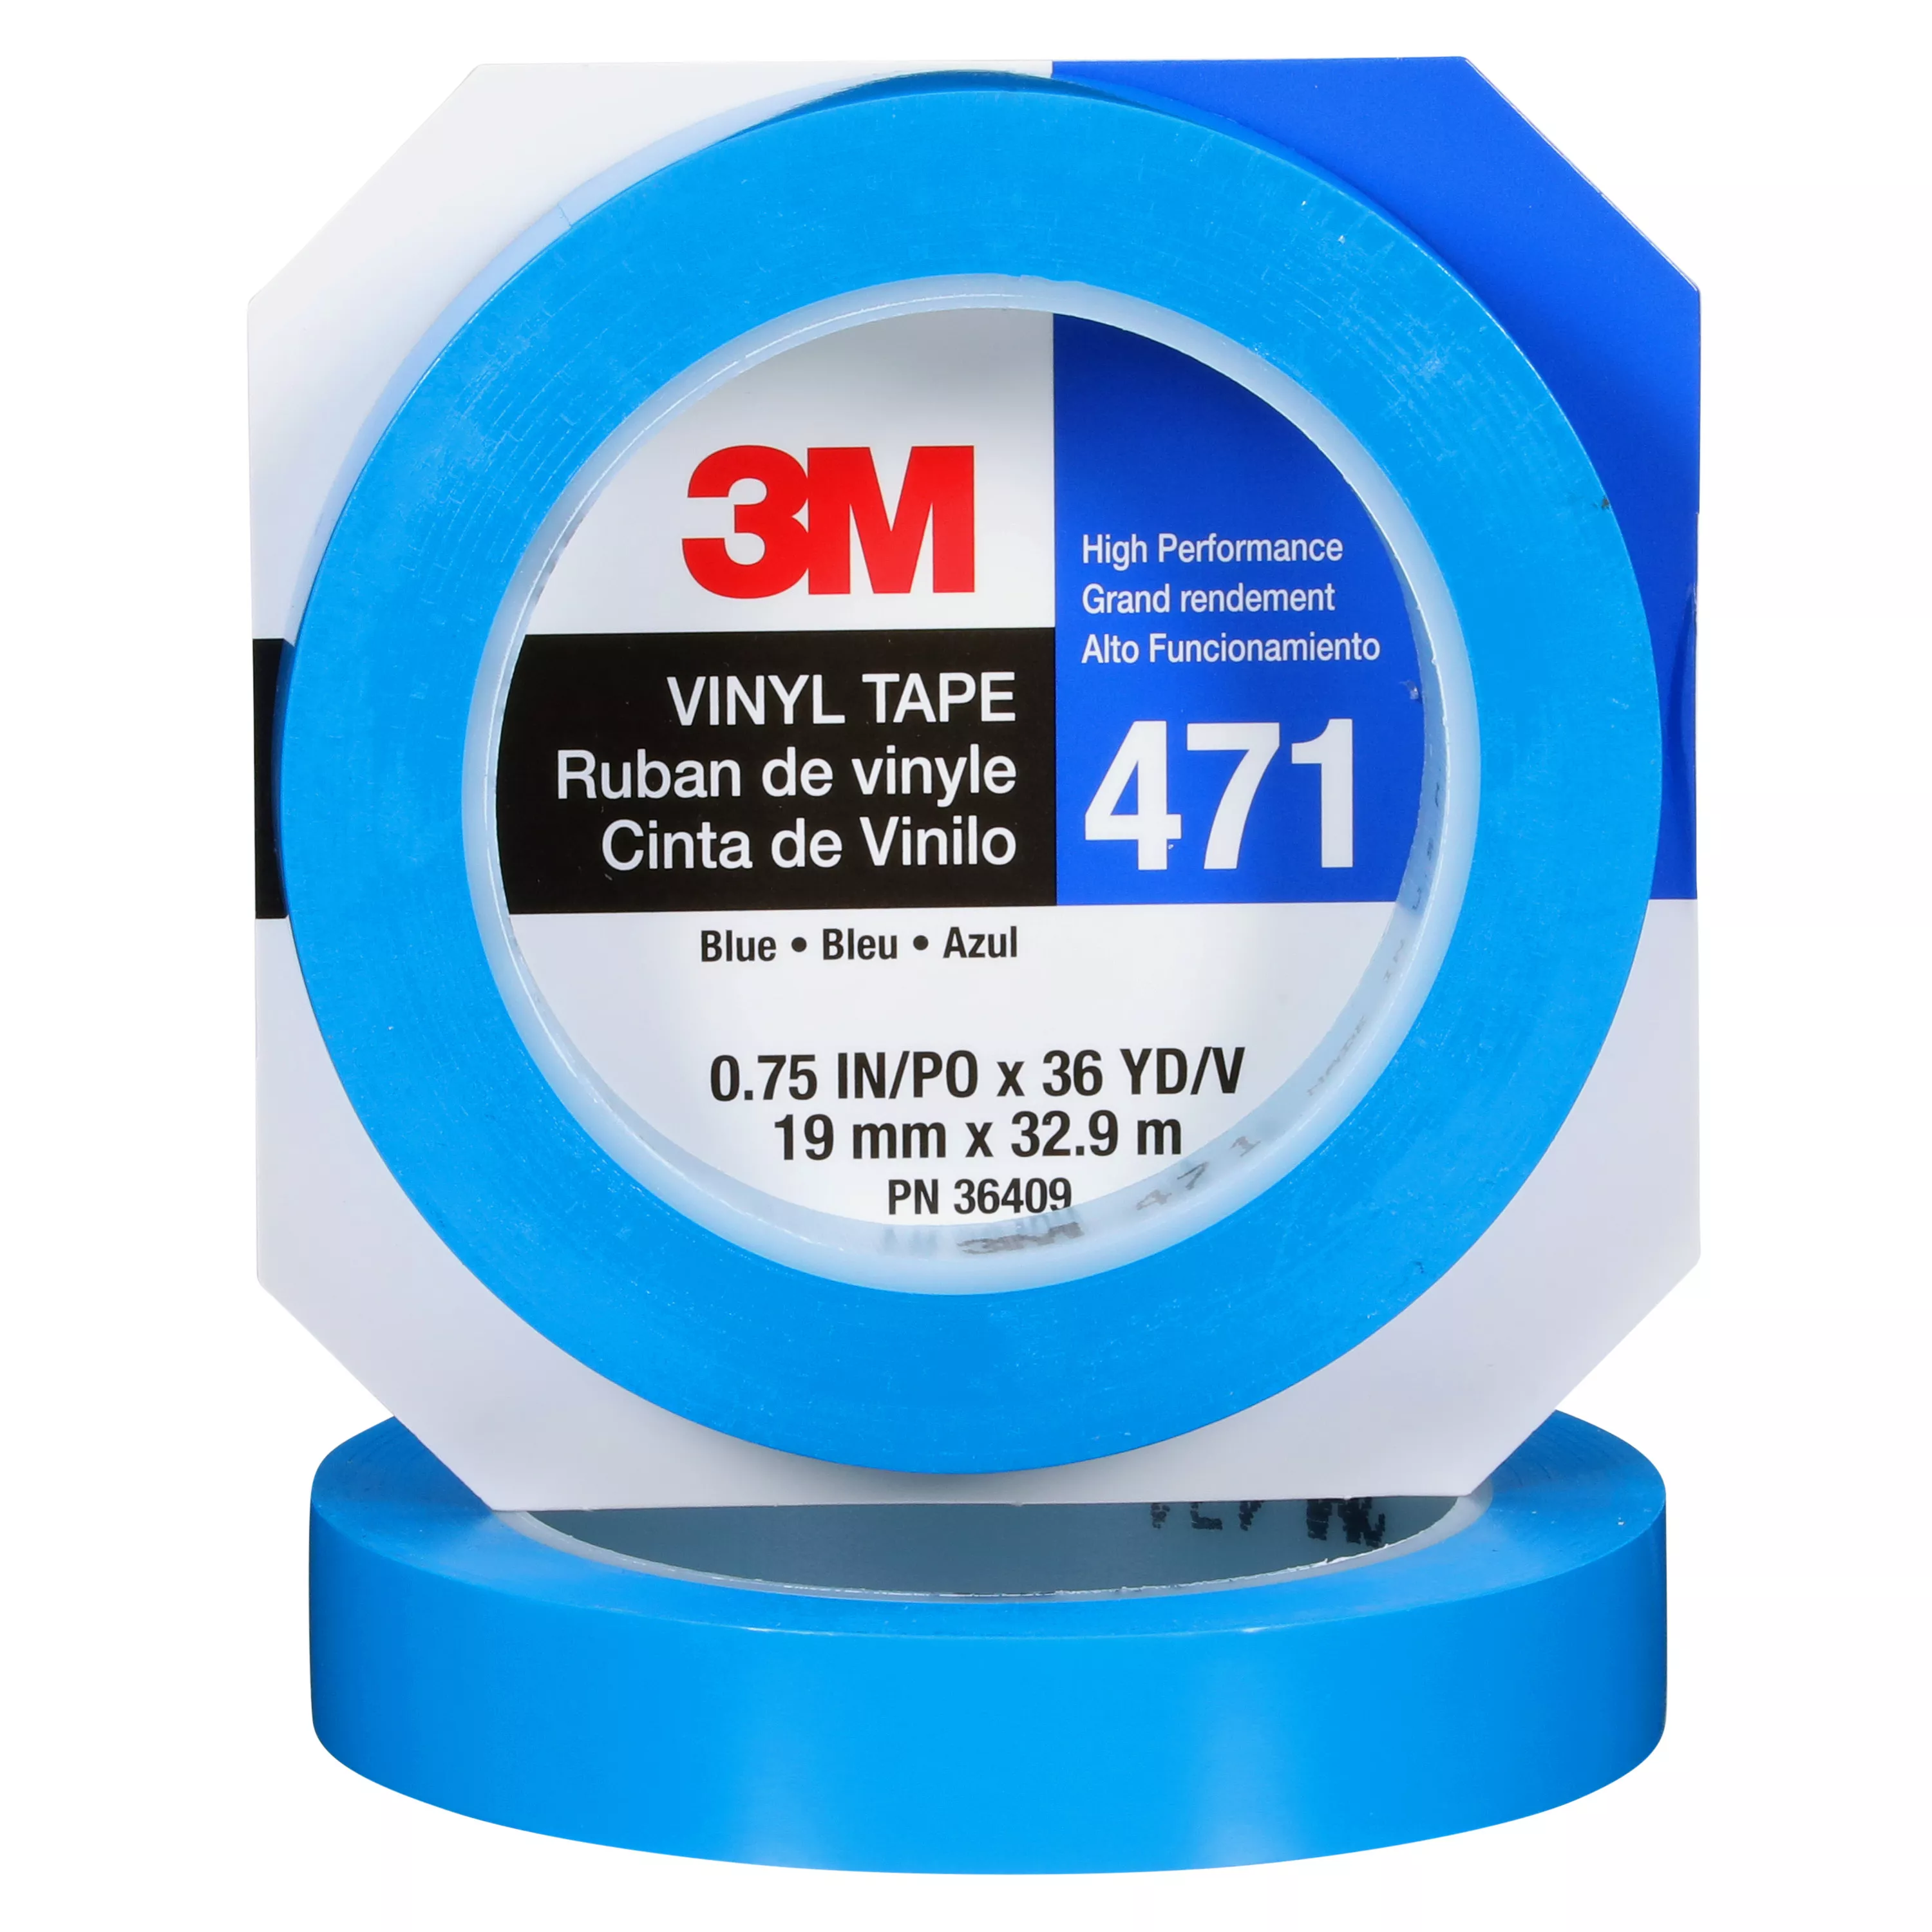 3M™ Vinyl Tape 471, Blue, 3/4 in x 36 yd, 48 Roll/Case, Individually
Wrapped Conveniently Packaged